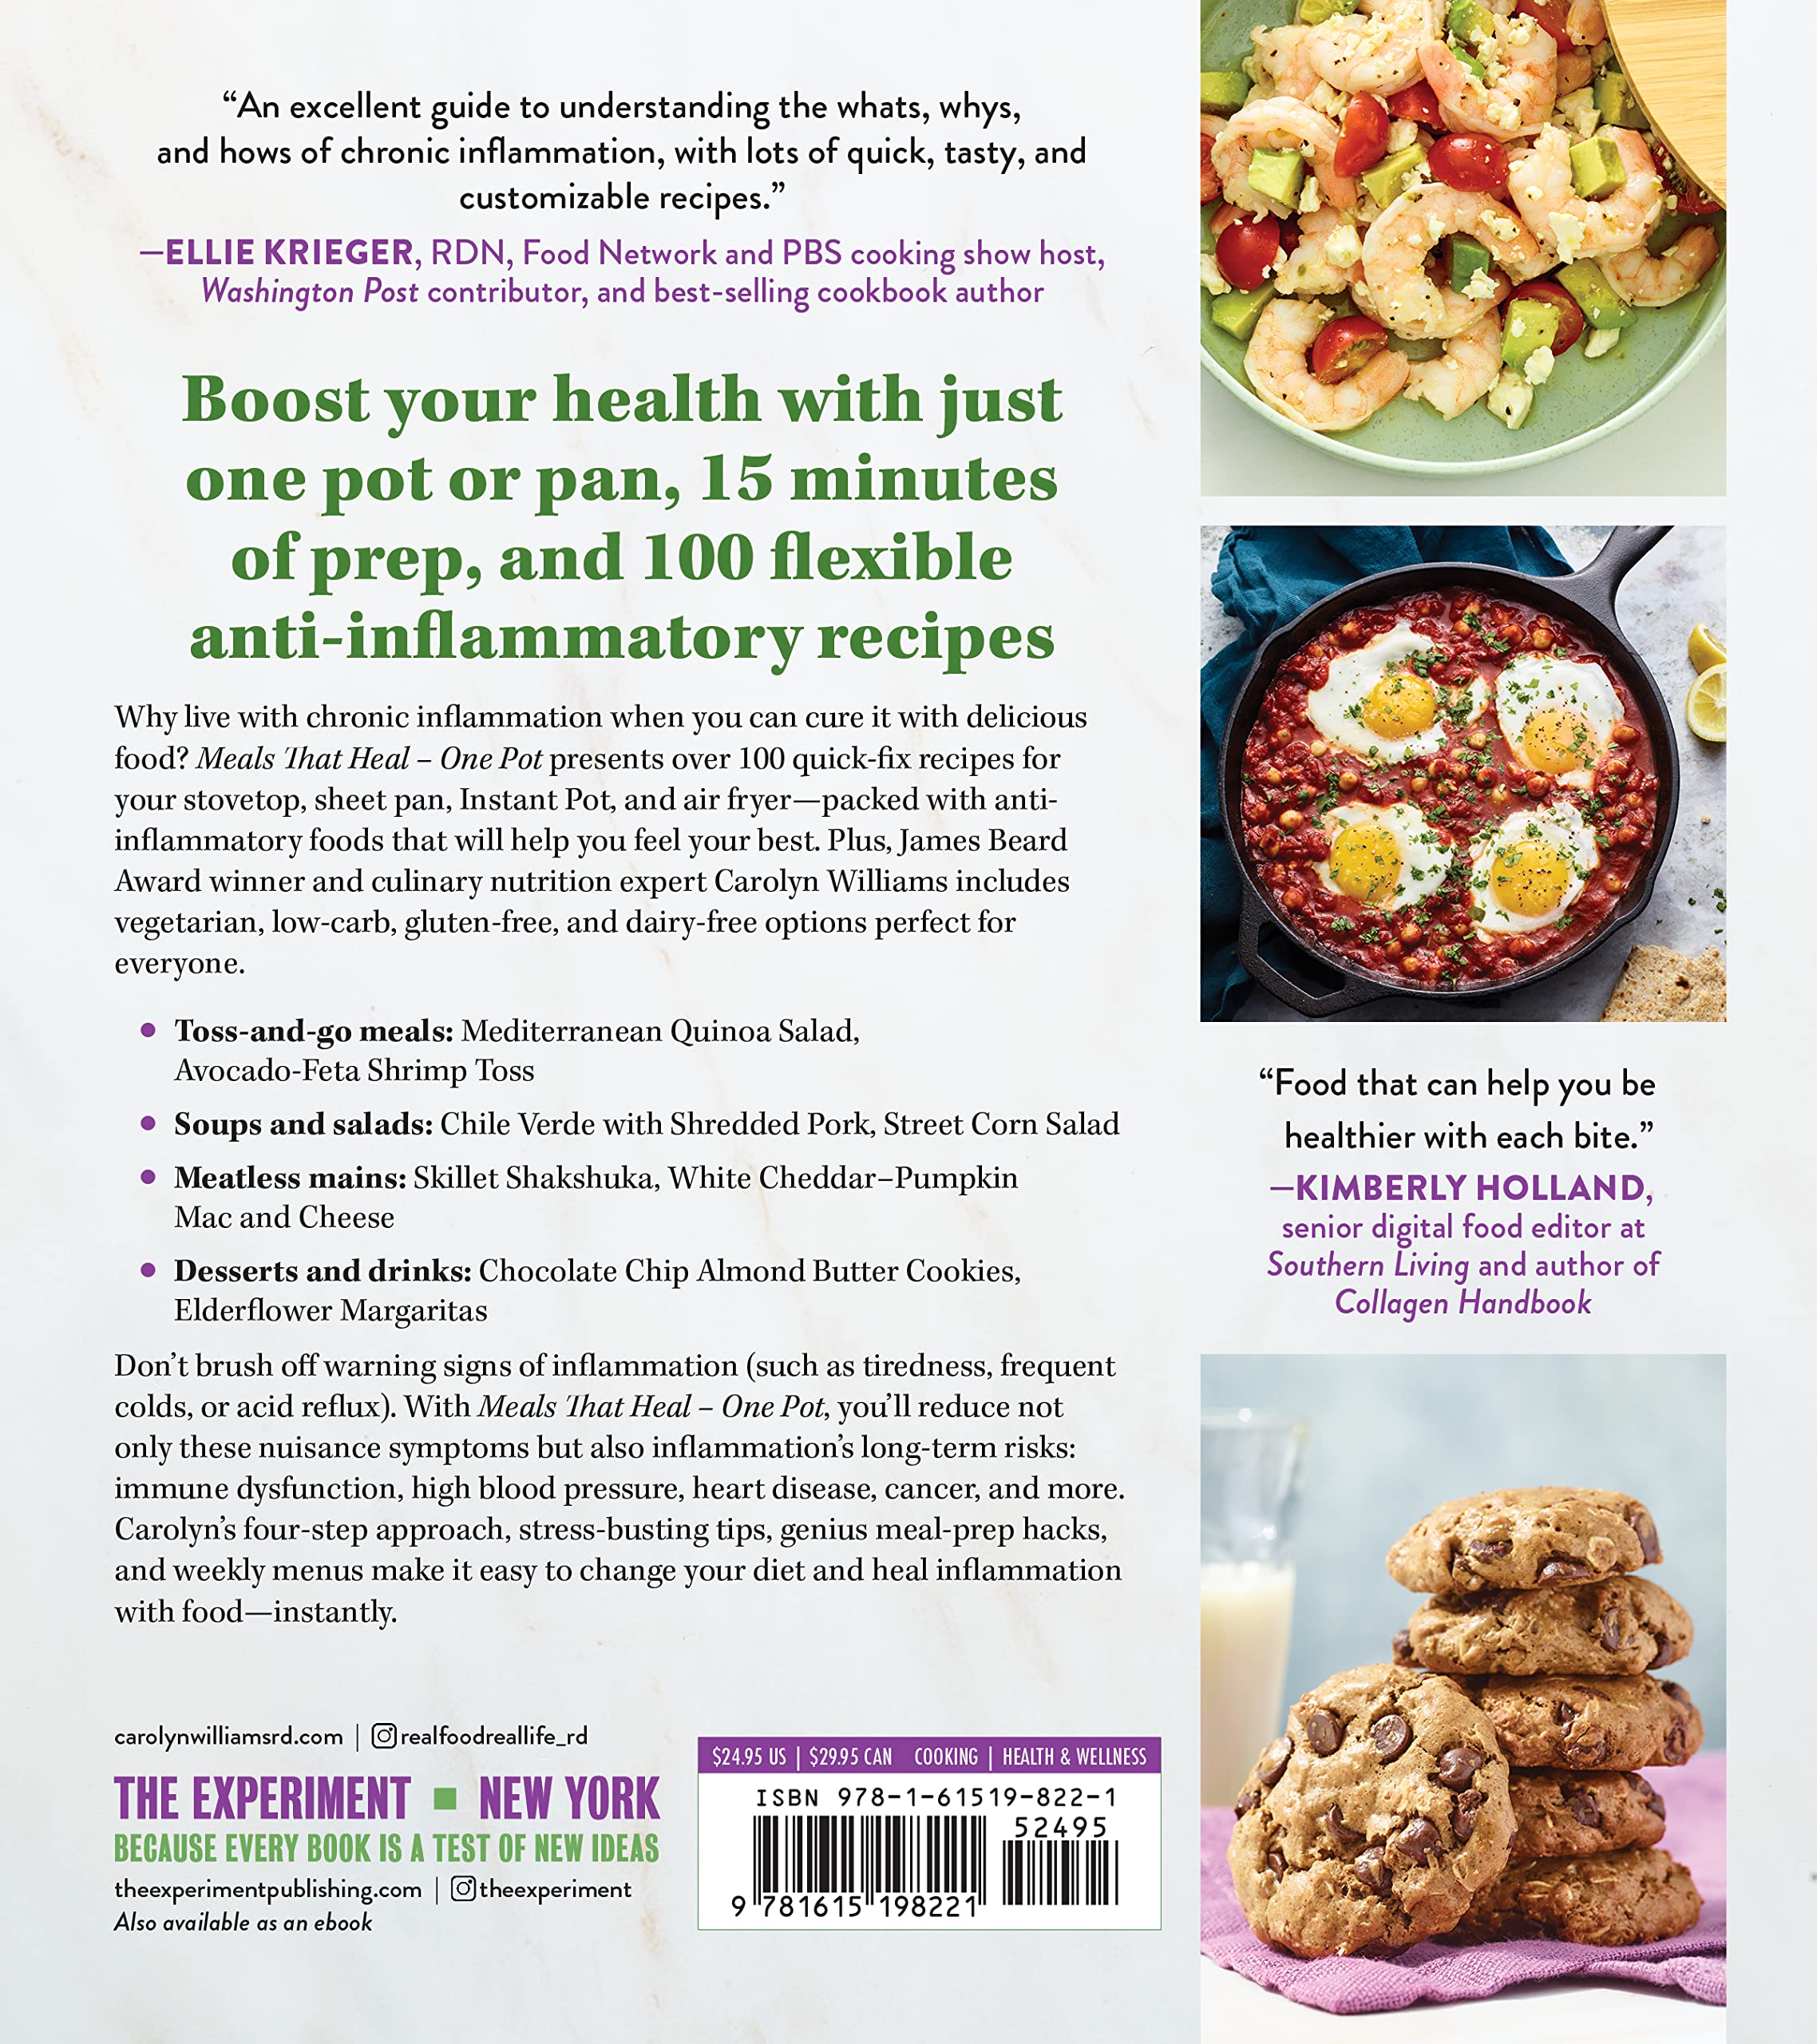 Meals That Heal – One Pot: Promote Whole-Body Health with 100+ Anti-Inflammatory Recipes for Your Stovetop, Sheet Pan, Instant Pot, and Air Fryer